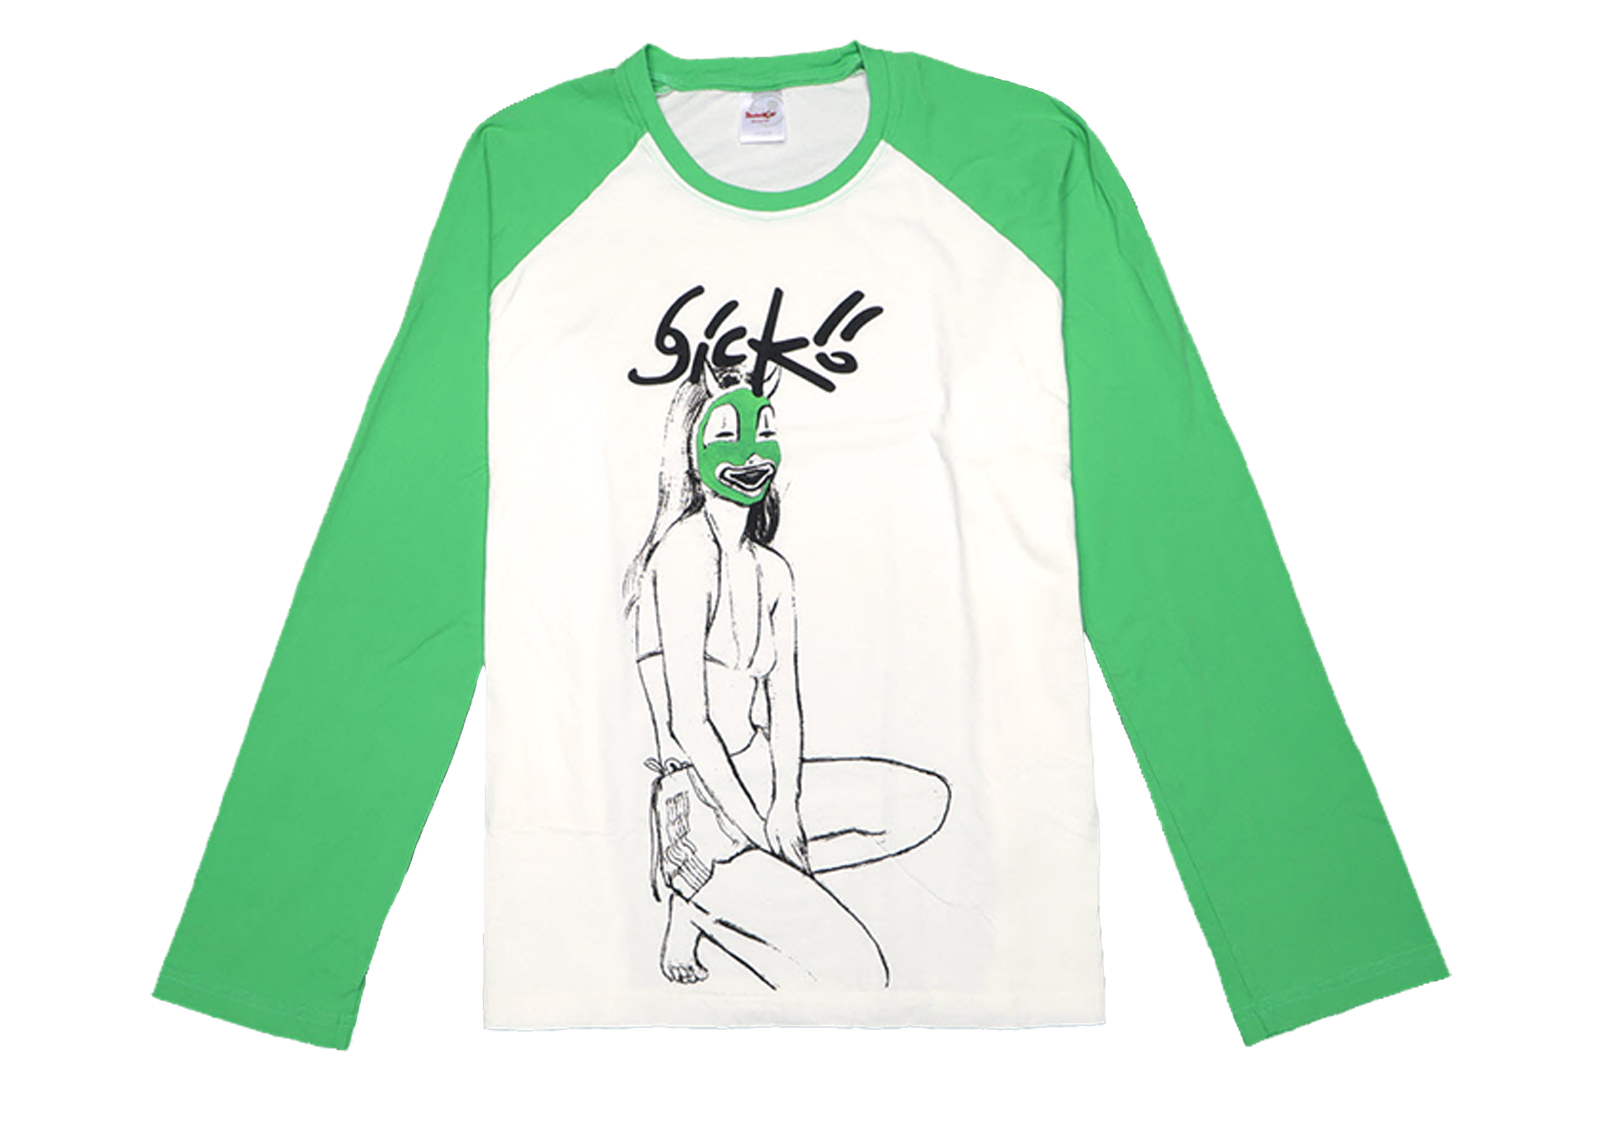 Sicko Cry Later Japan Exclusive Raglan L/S Green メンズ - FW19 - JP